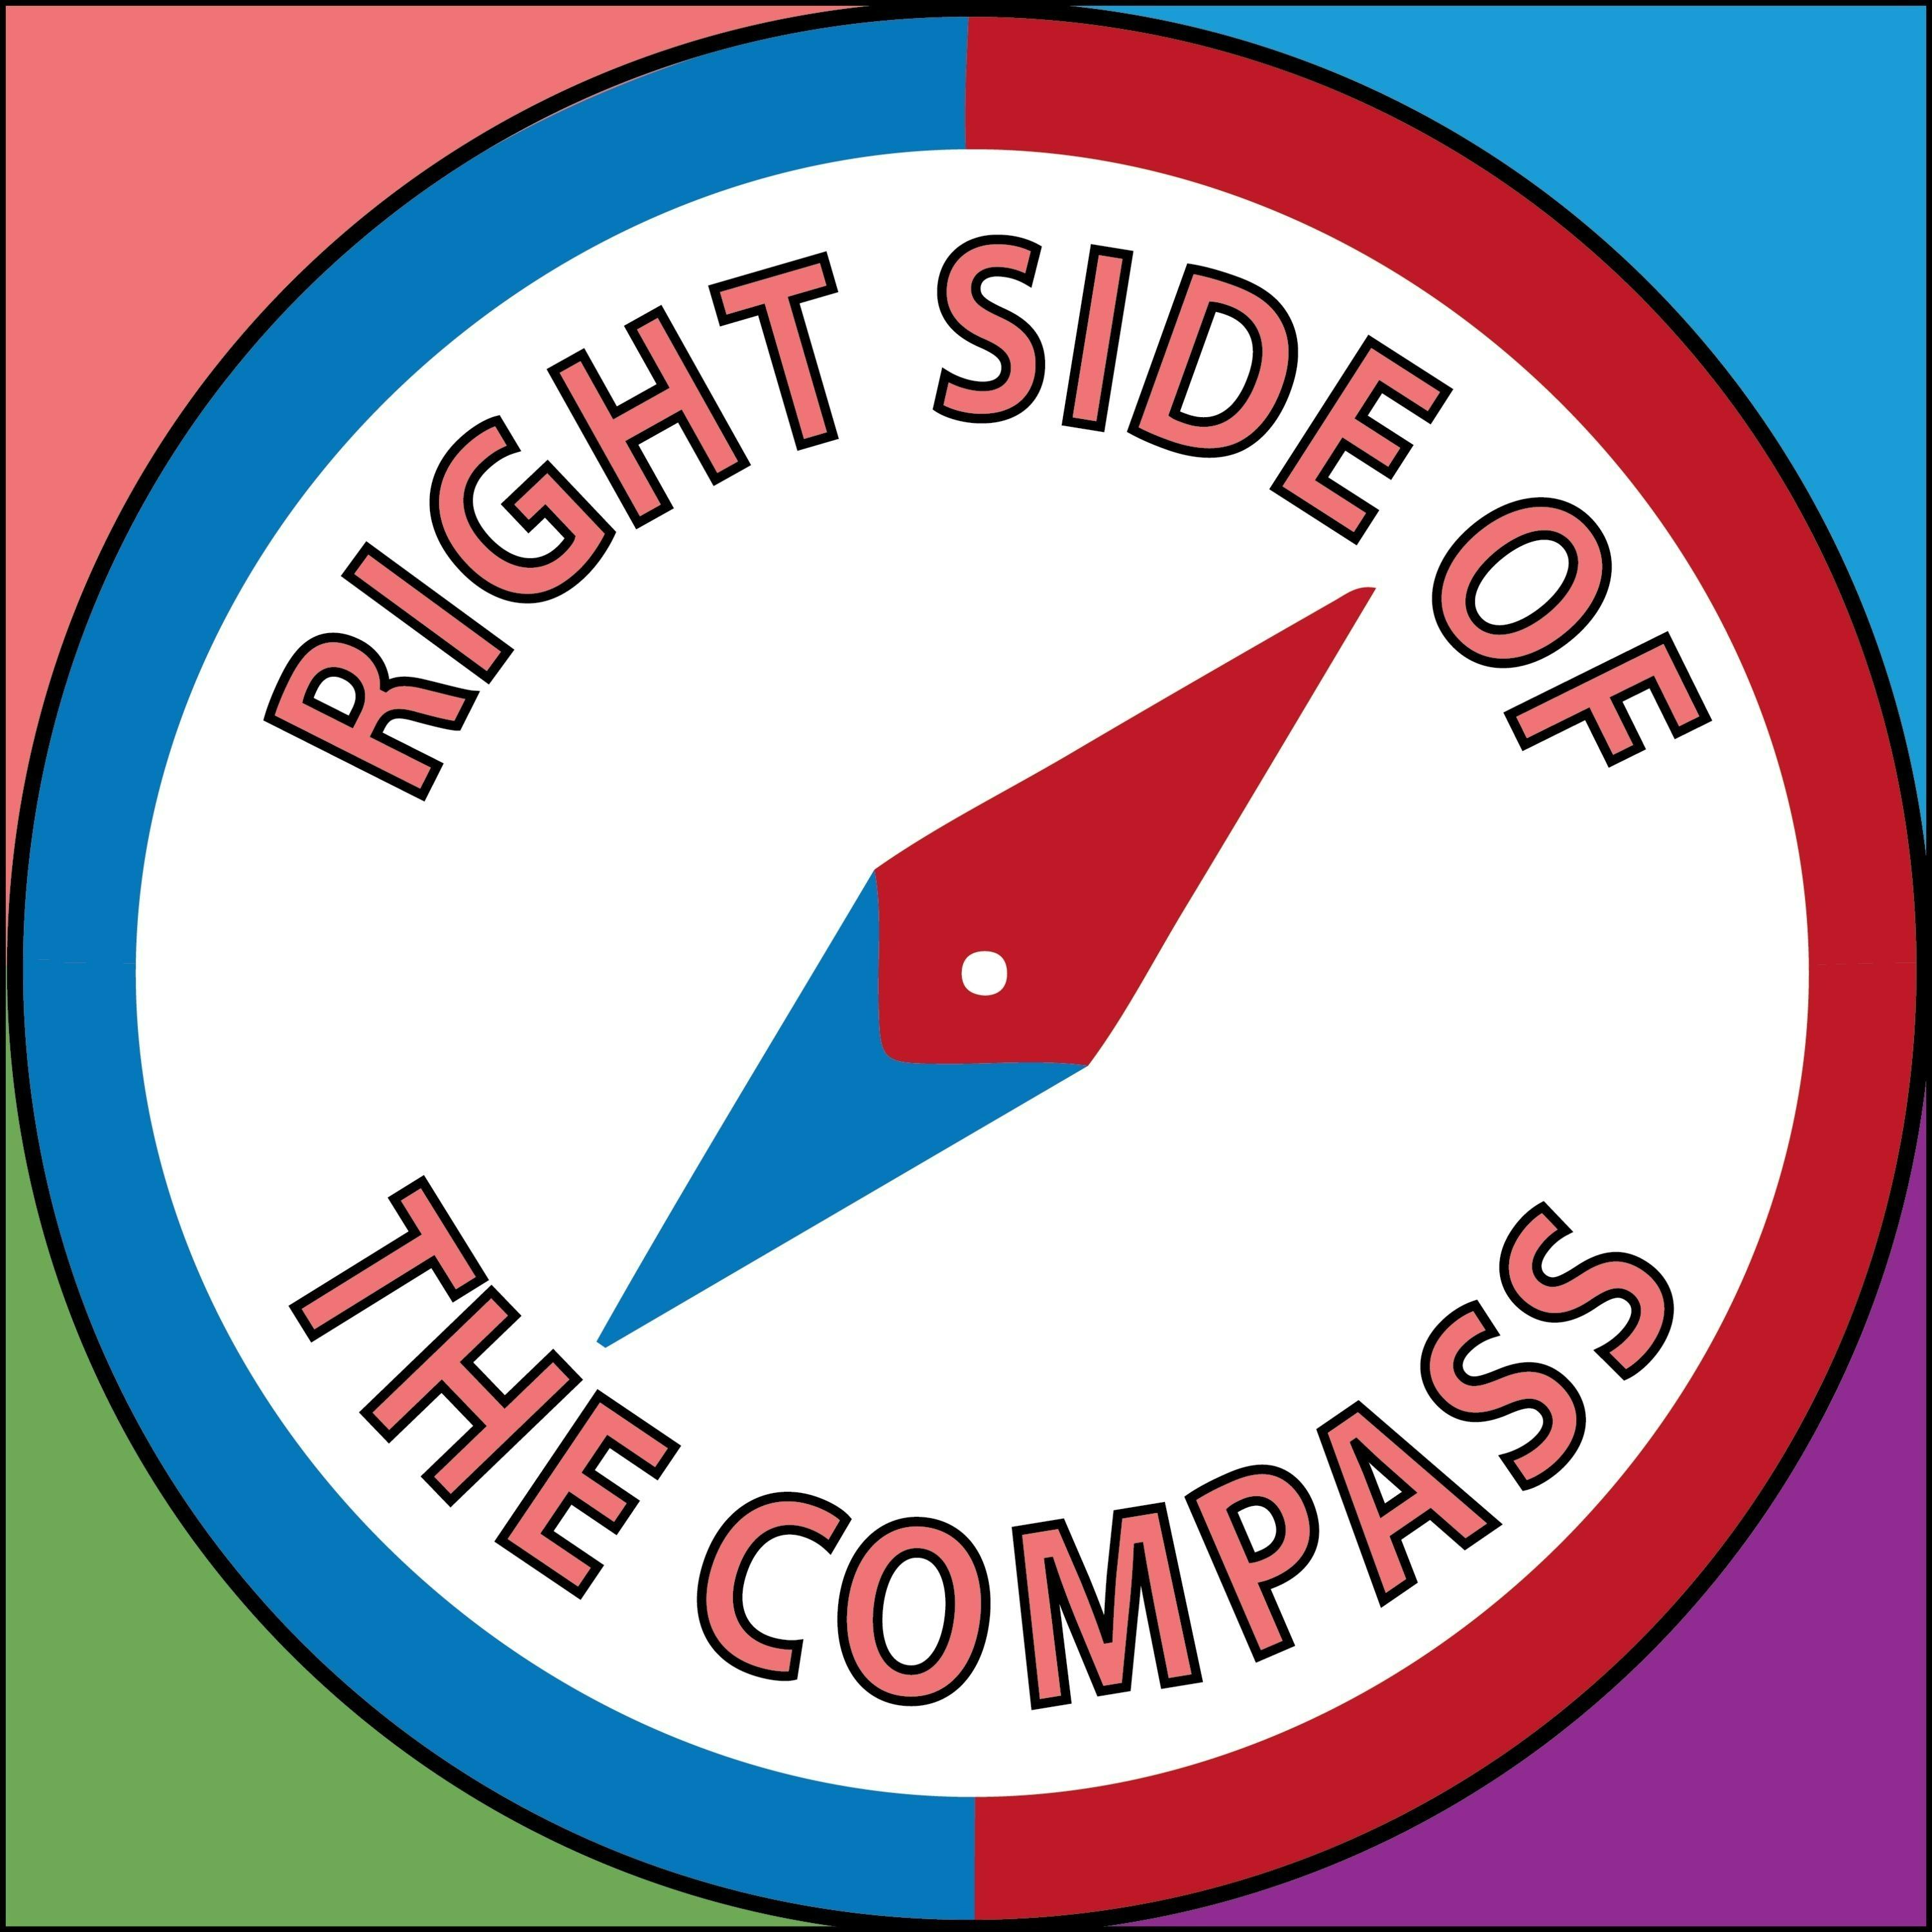 Right Side of the Compass